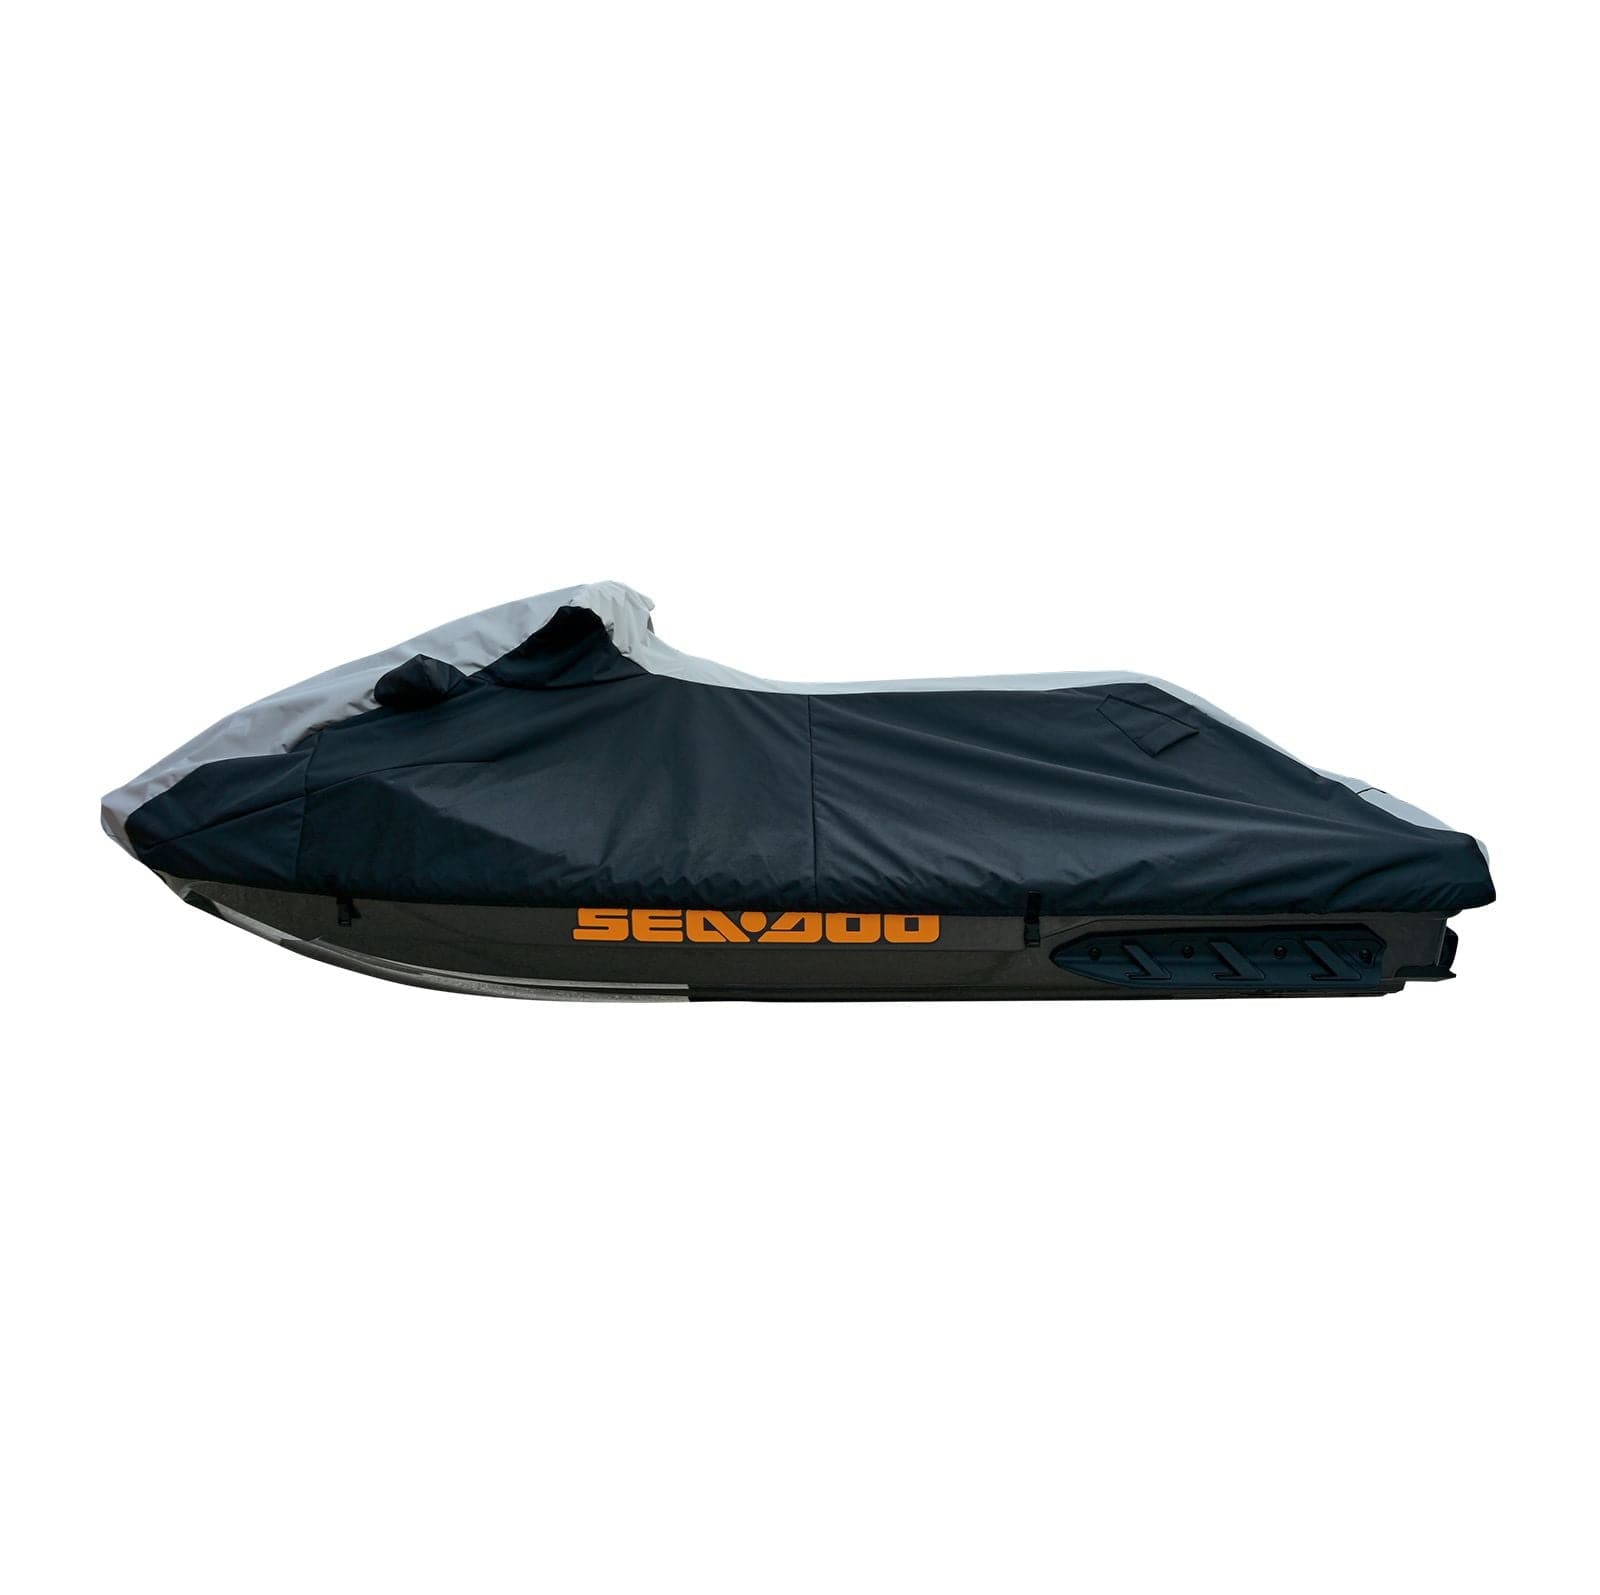 Trailerable Storage cover with vents for Sea-Doo 2004-2011 RXP